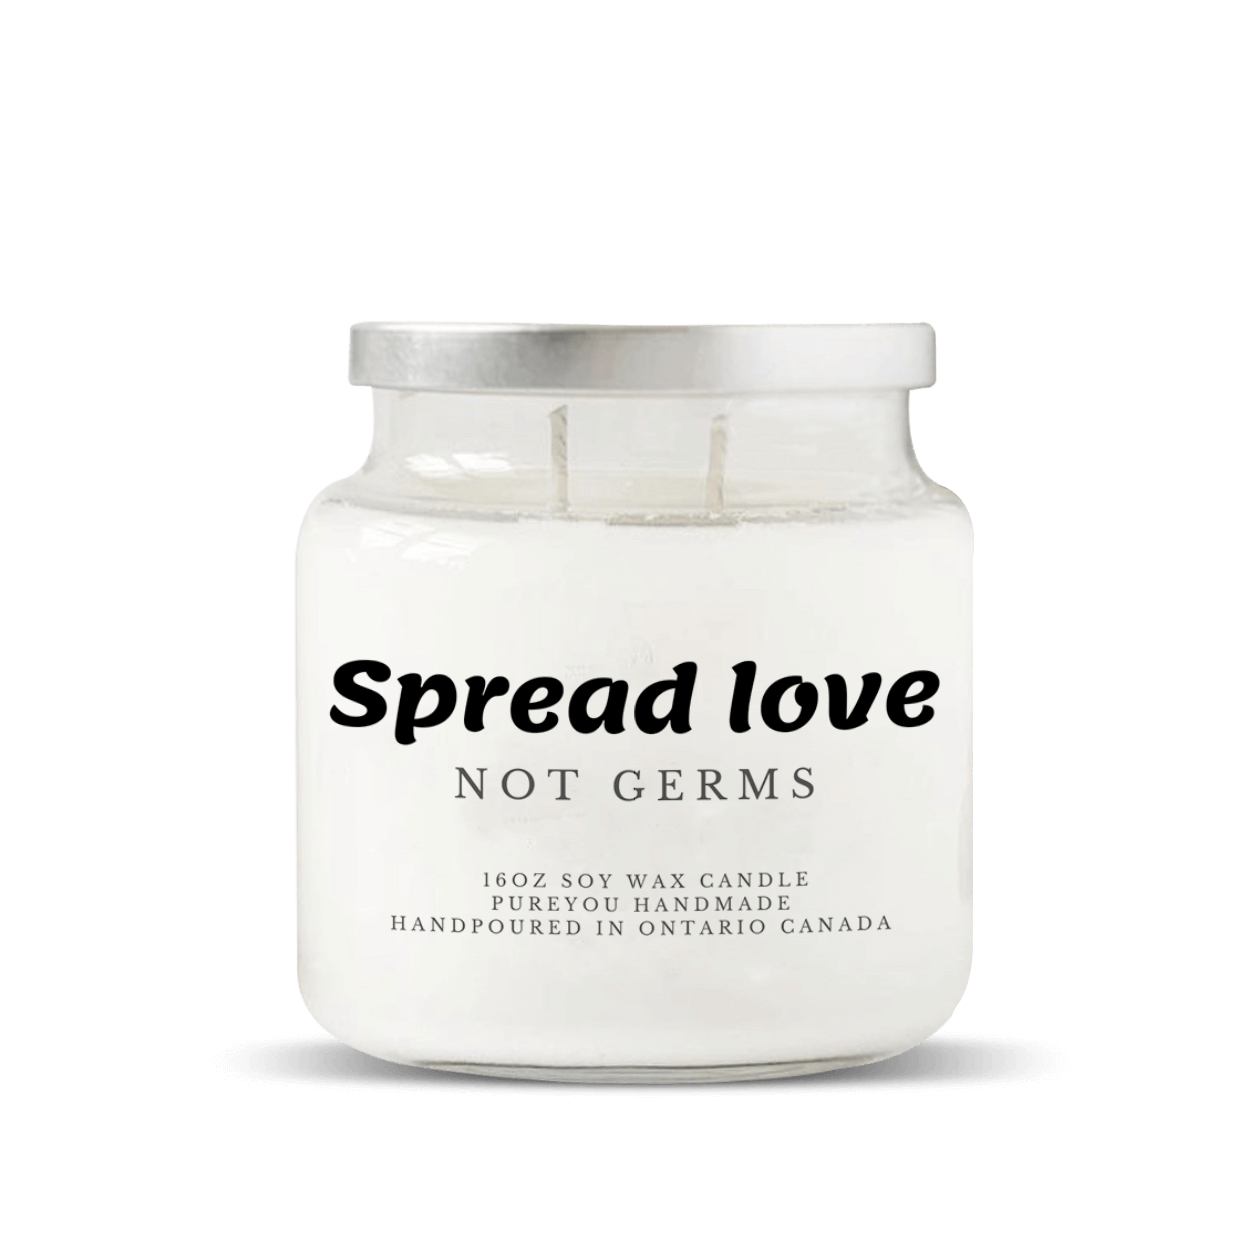 "Spread Love Not Germs" Soy Wax Candle